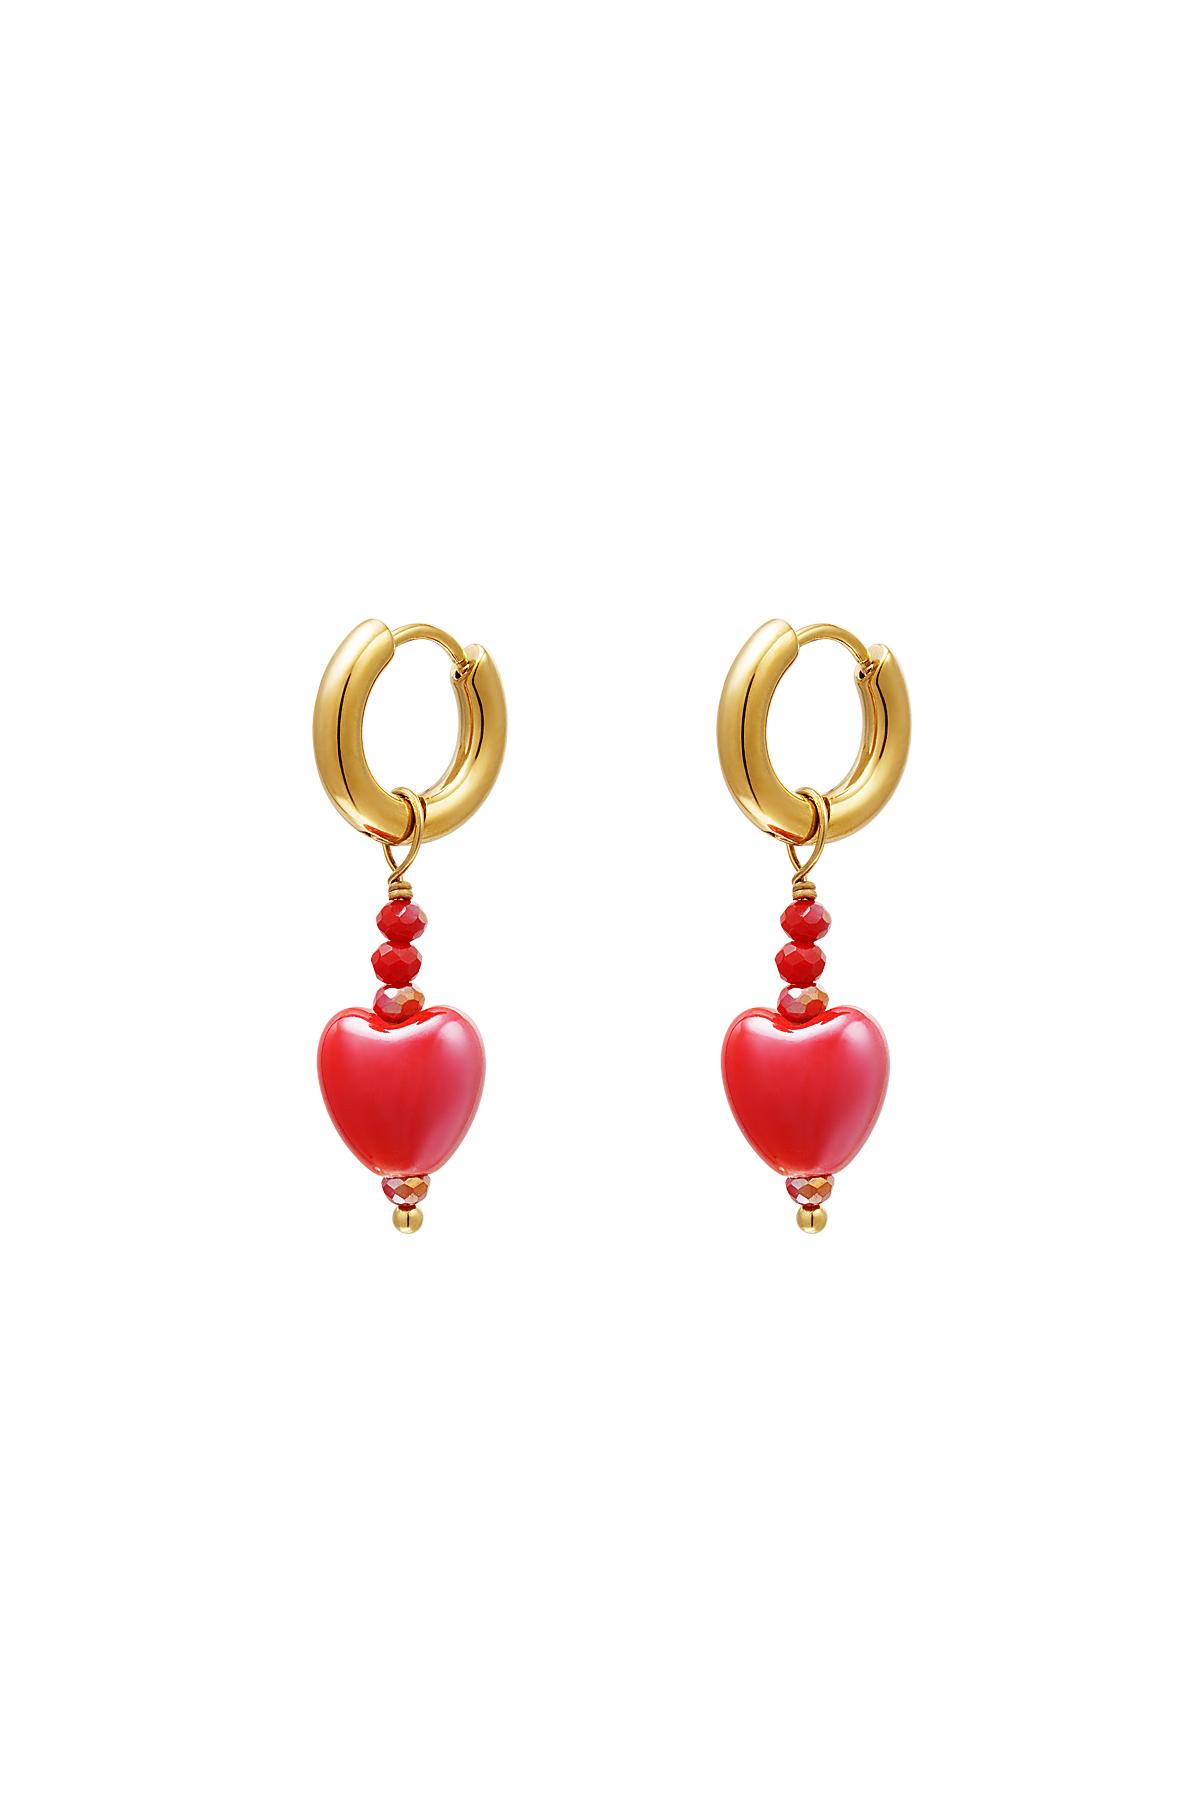 Colourful heart earrings - #summergirls collection Red Ceramics